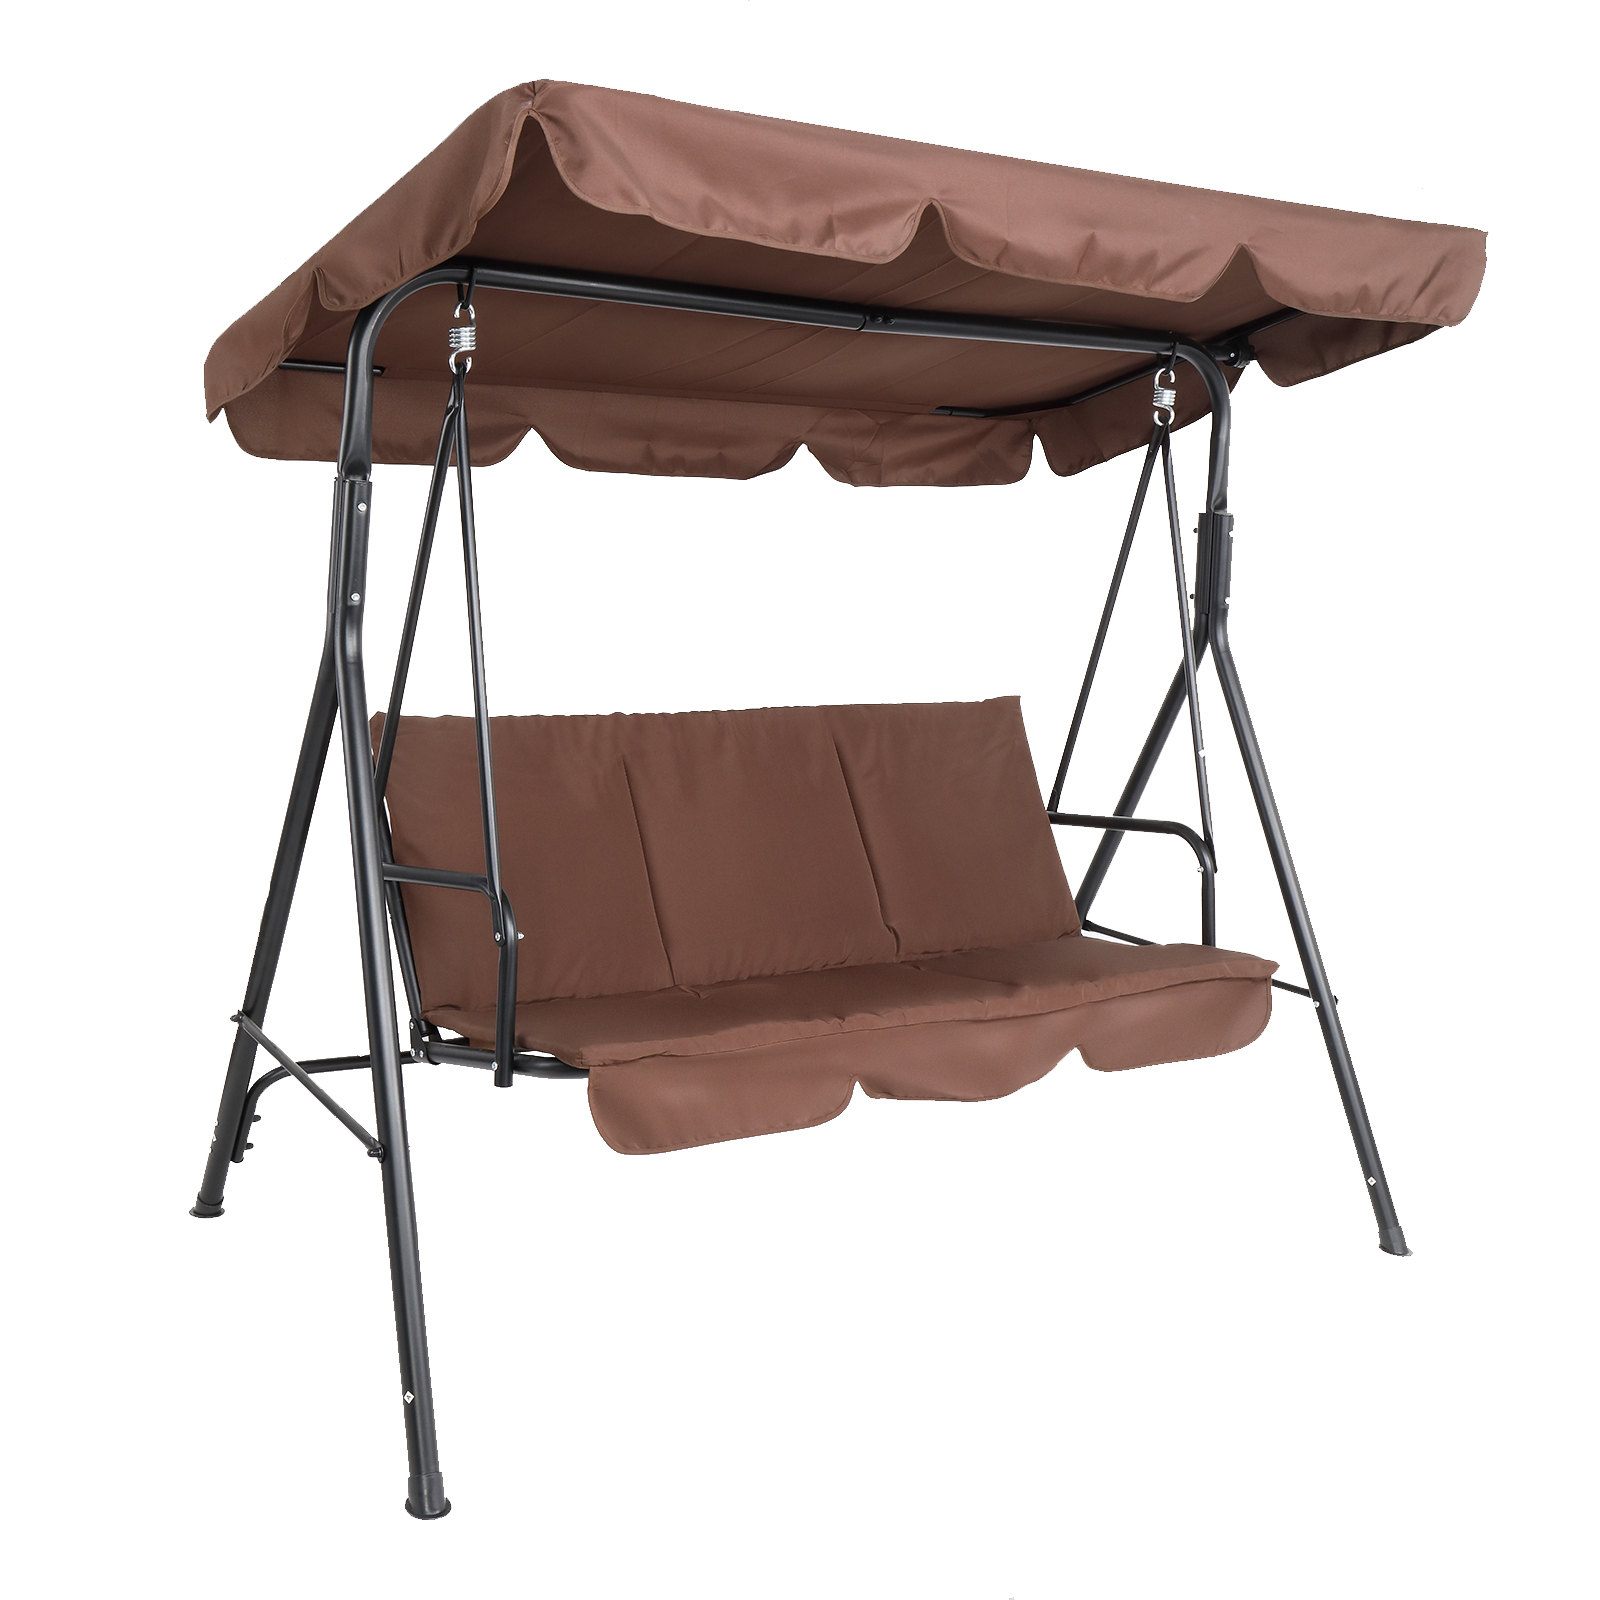 3 Person Outdoor Patio Swing Seat with Adjustable Canopy, All Weather Resistant Hammock Swing Chair W/ Removable Cushions, High Load-Bearing Sunshade Swing for Patio Garden Pool Balcony, T791 - image 1 of 9